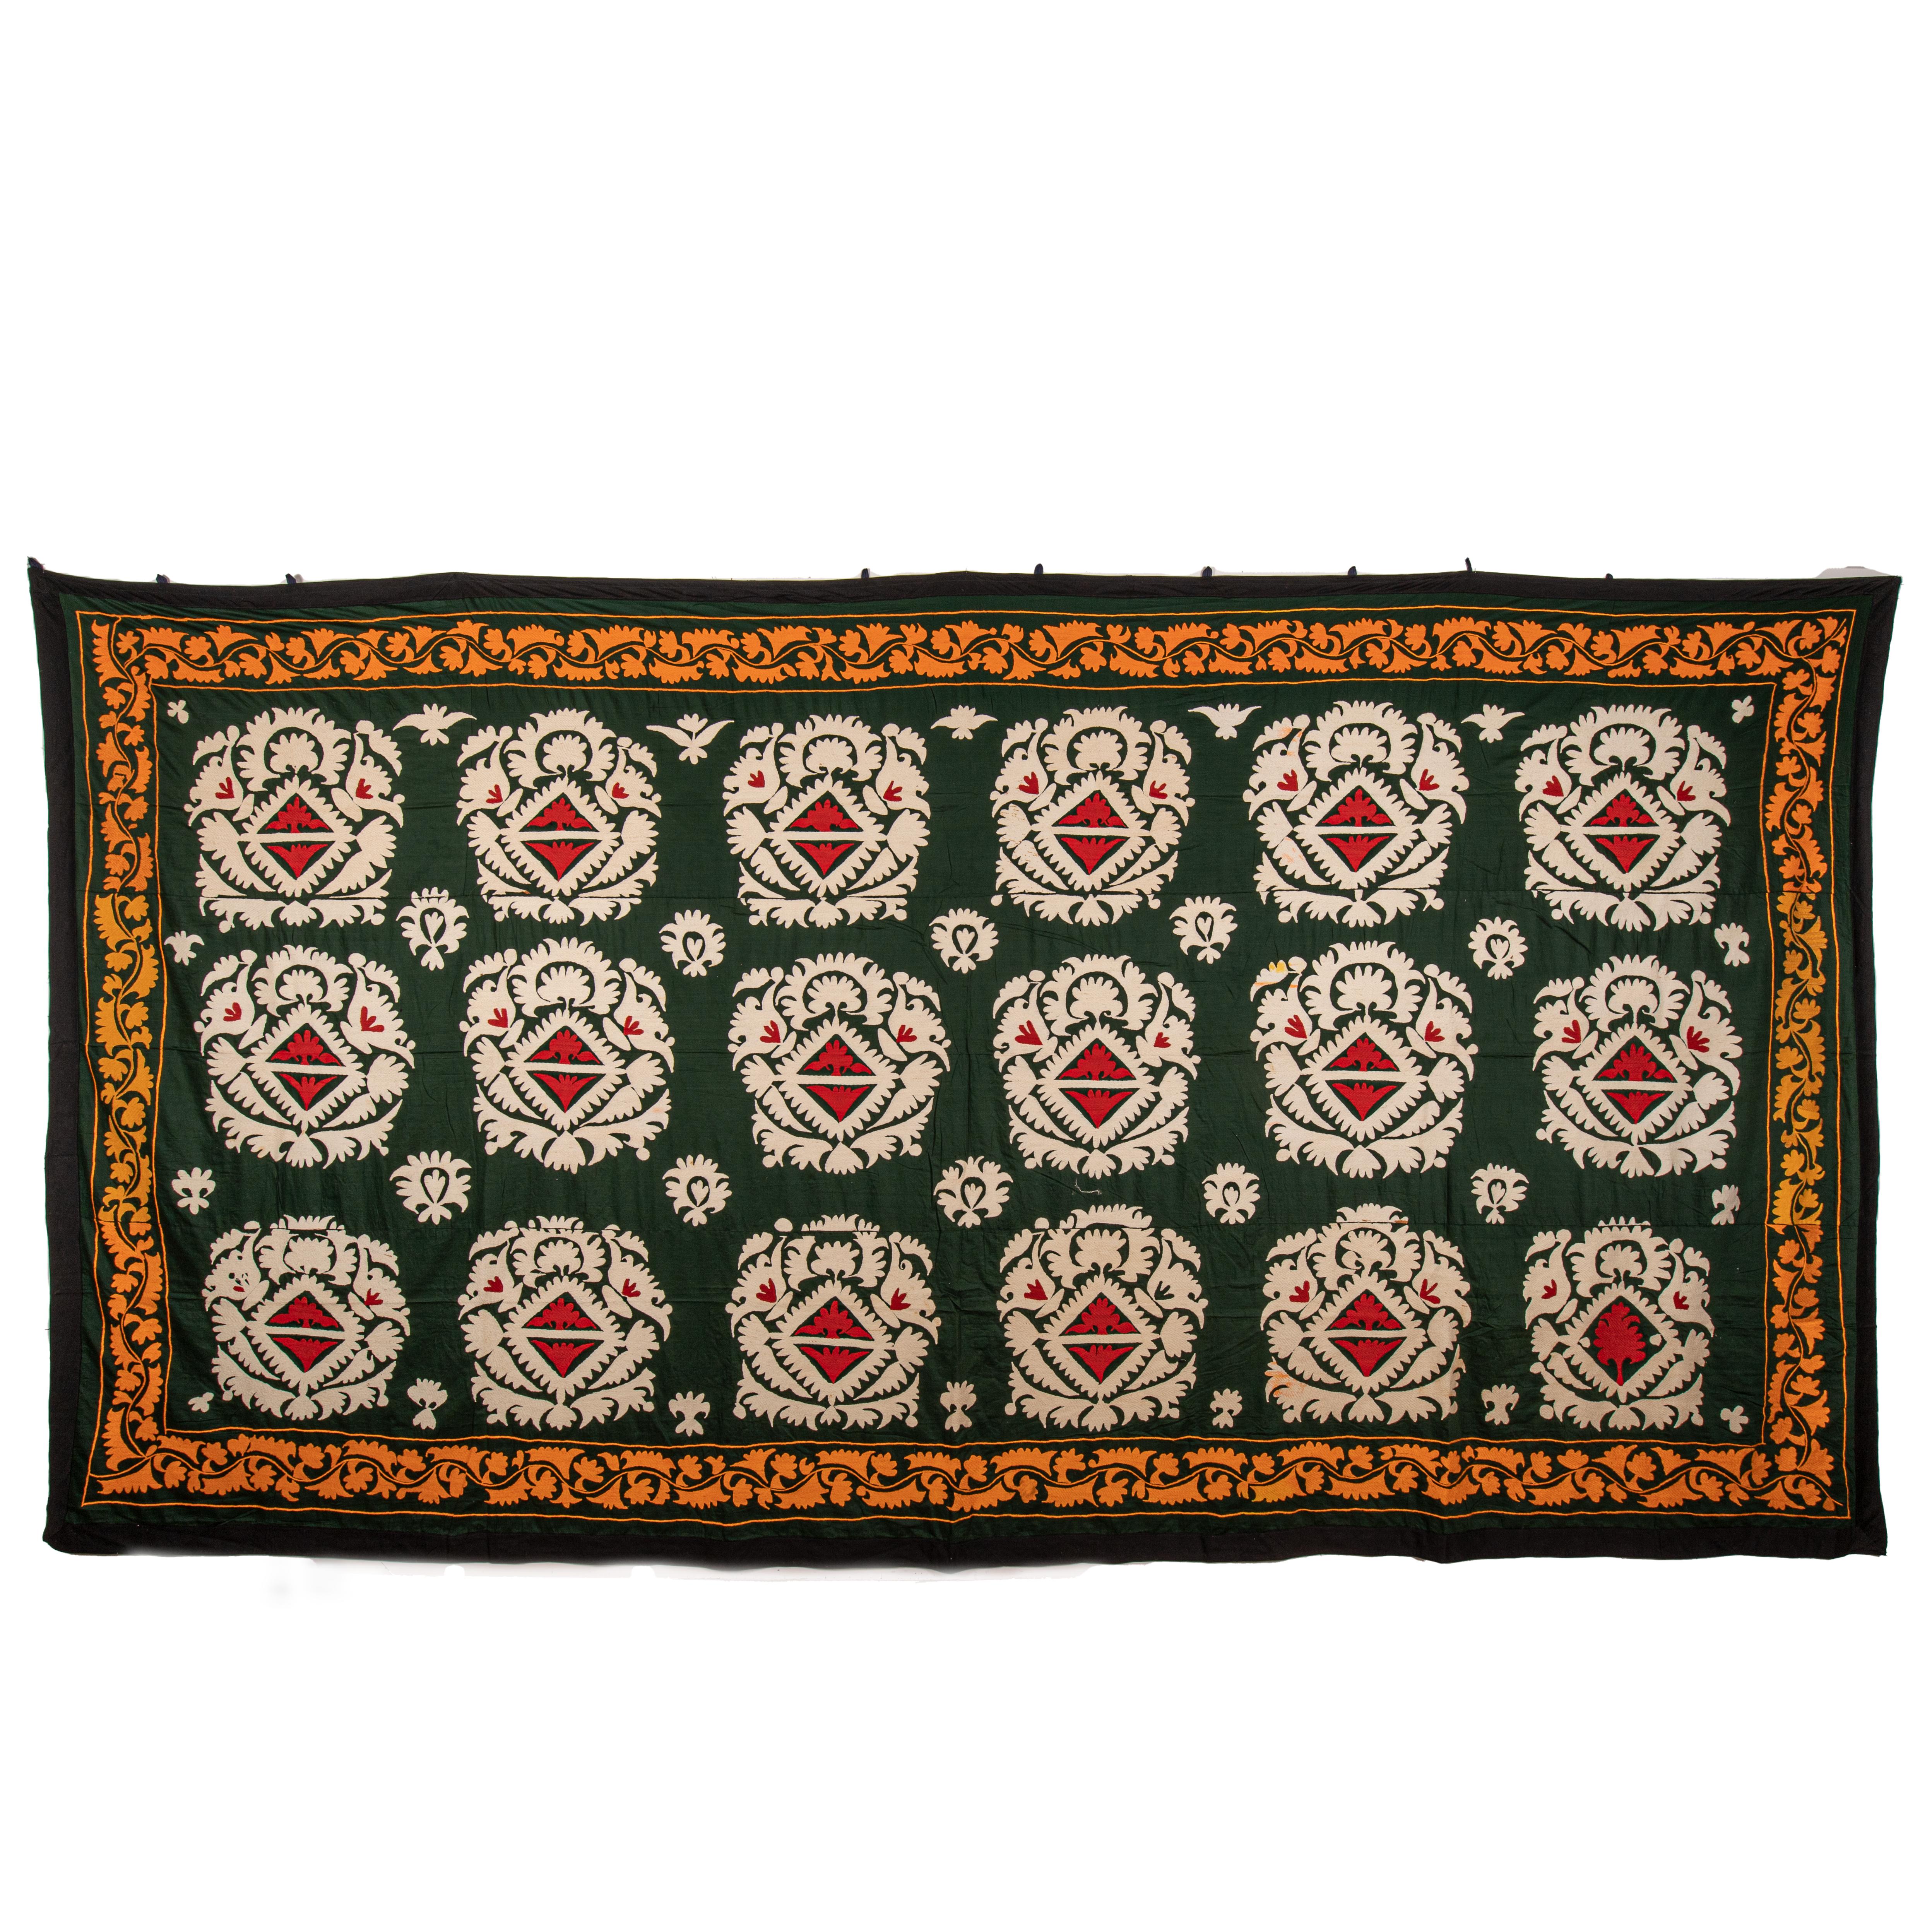 This is a vintage, large Suzani embroidered in cotton from Samarkand Uzbekistan dating back to mid 20th Centry.